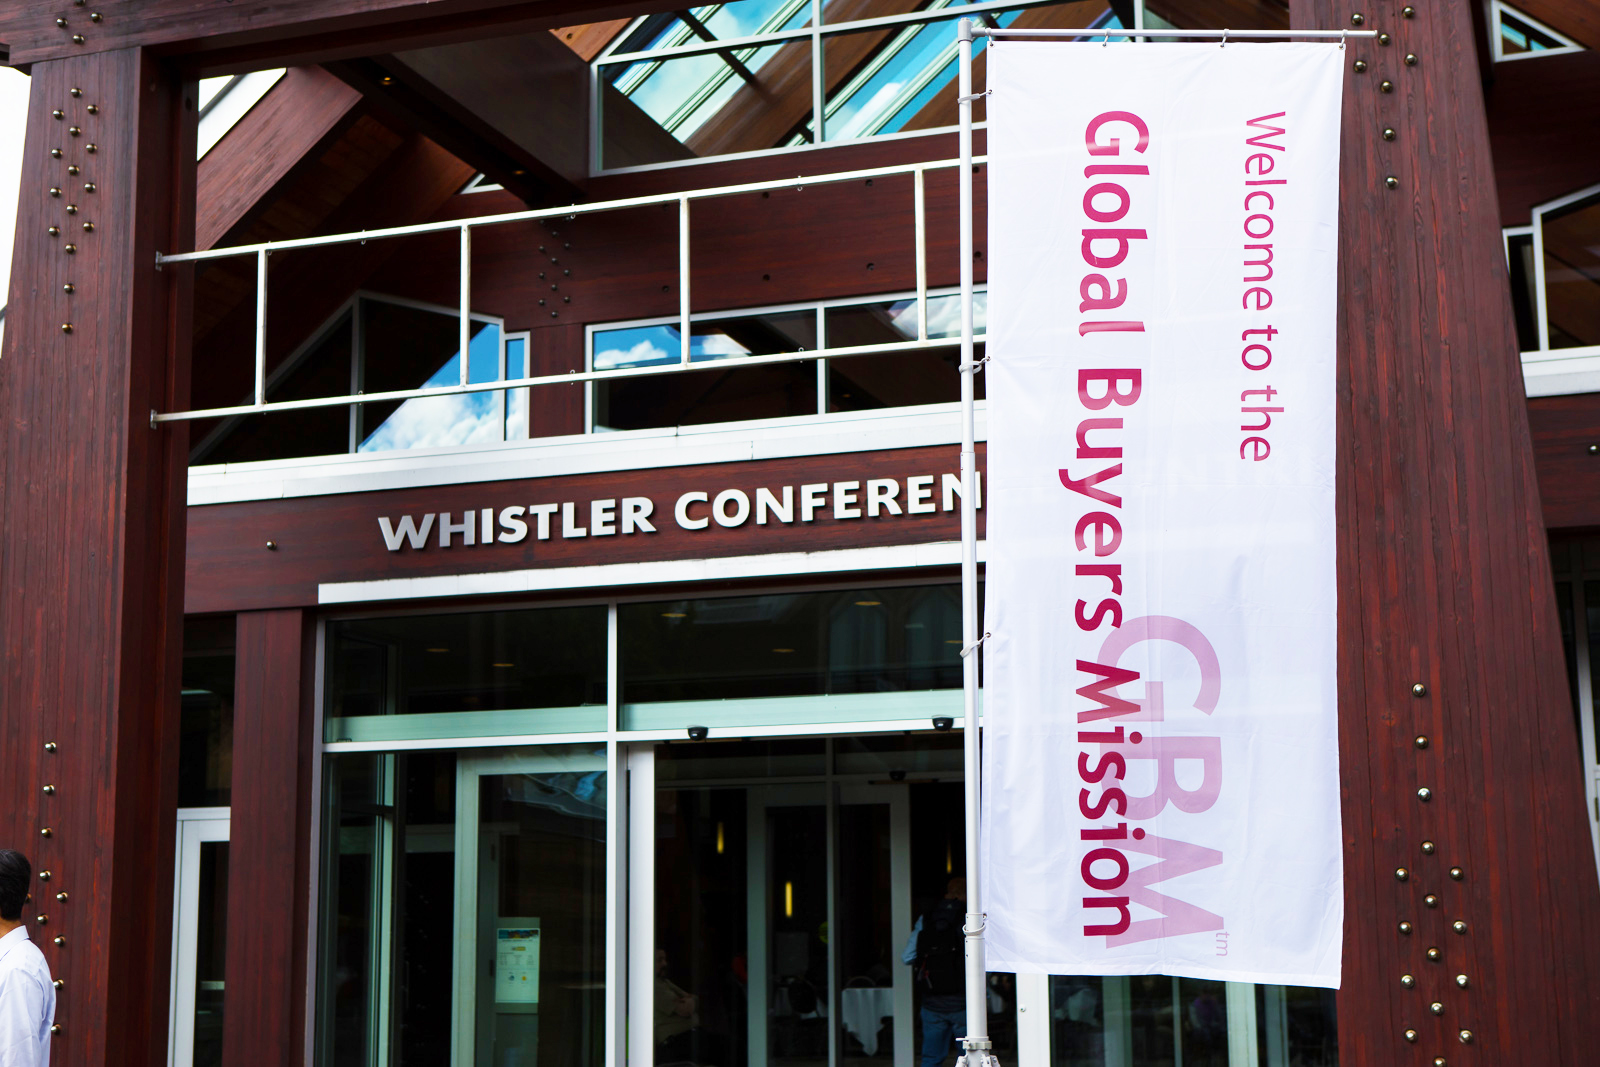 Facade of Whislter Conference Centre with a white vertical banner of the GBM 2016.